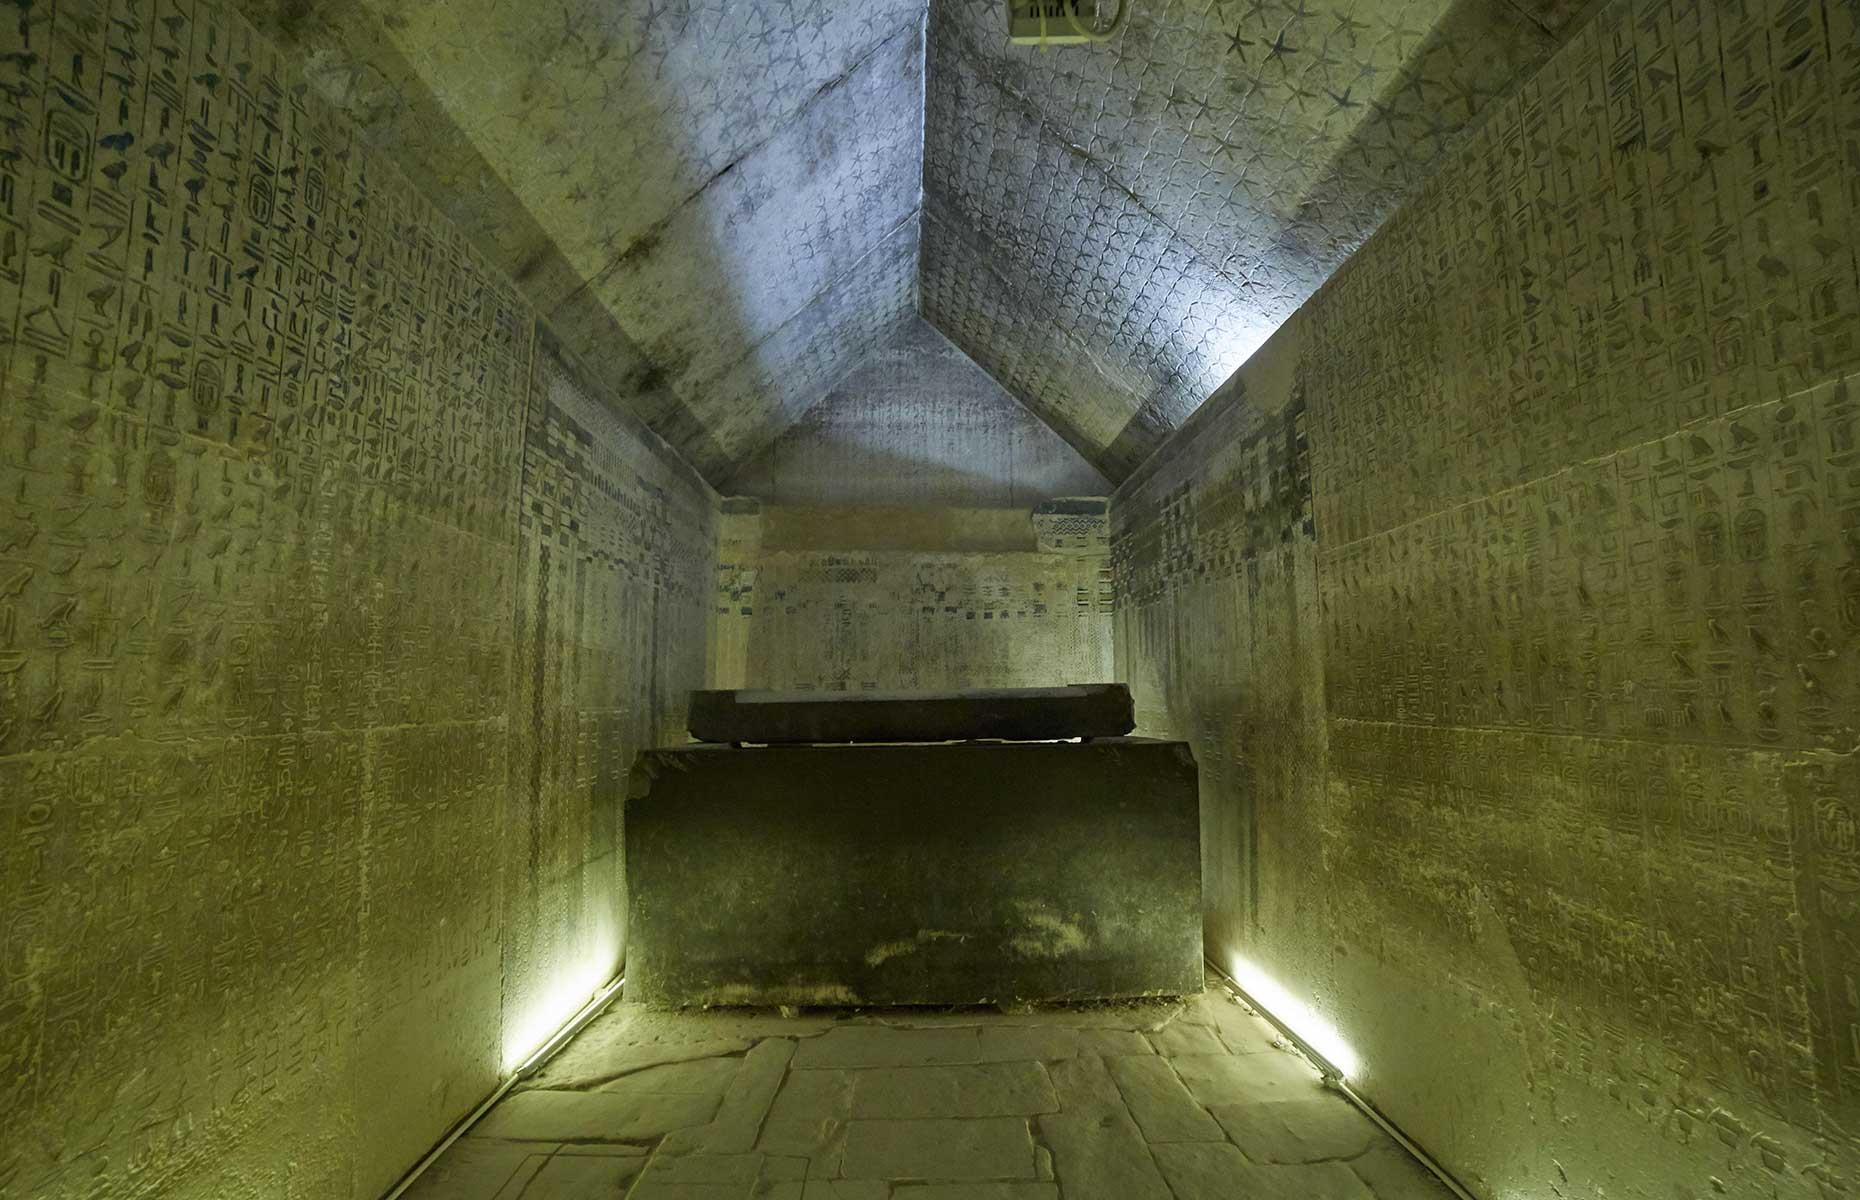 <p>Inside King Unas's burial chamber was the sarcophagus. The chamber's ceiling was beautifully patterned with gold stars against a night-blue sky. While the contents were robbed long before excavations could begin, the <a href="http://www.ancient-egypt.org/history/old-kingdom/5th-dynasty/unas/pyramid-complex-of-unas/pyramid-of-unas.html">mummified remains of a left arm, hand and skull</a> were found amongst the debris. Could these belong to the former pharaoh?  </p>